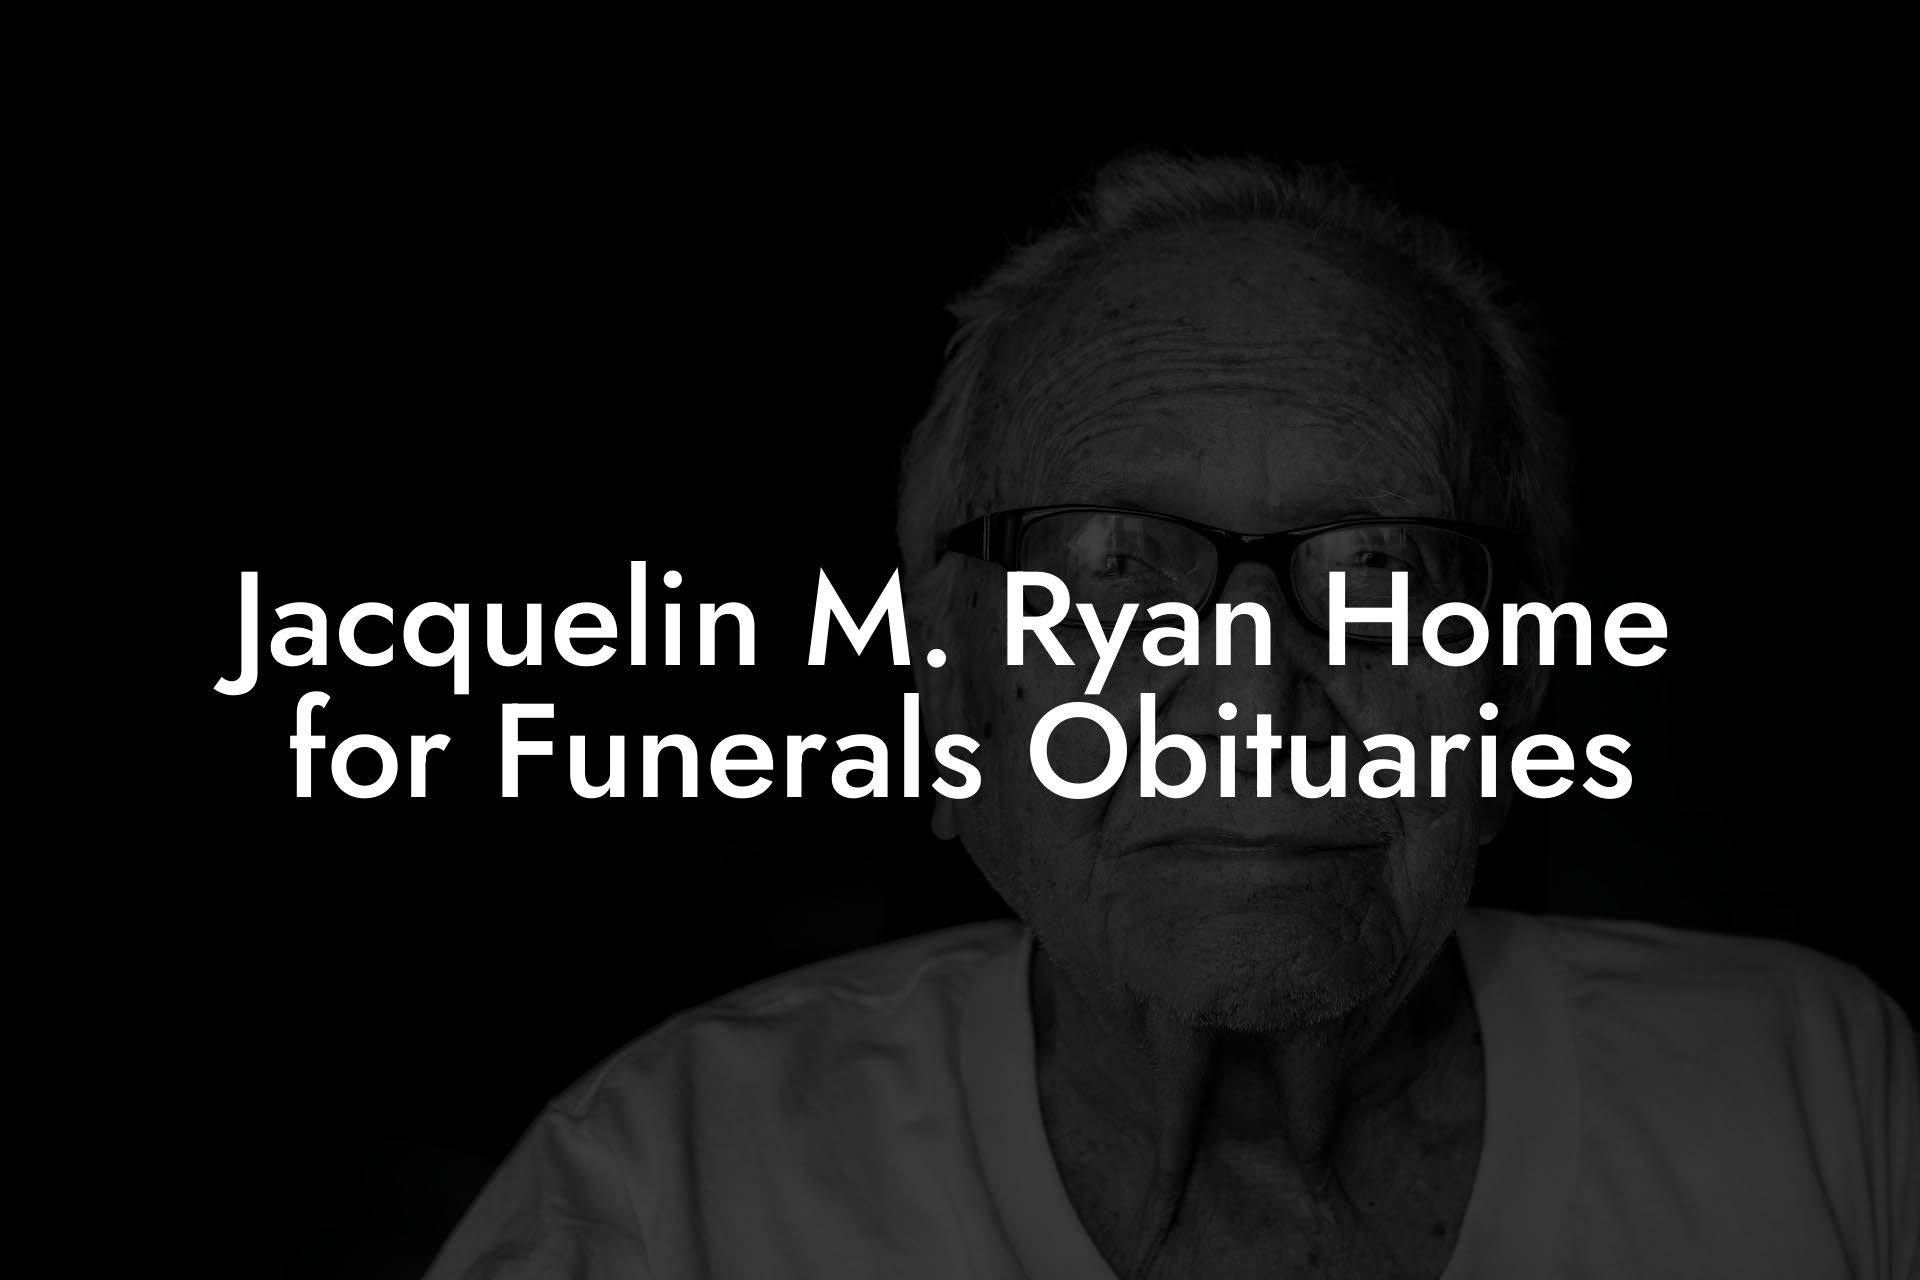 Jacquelin M. Ryan Home for Funerals Obituaries